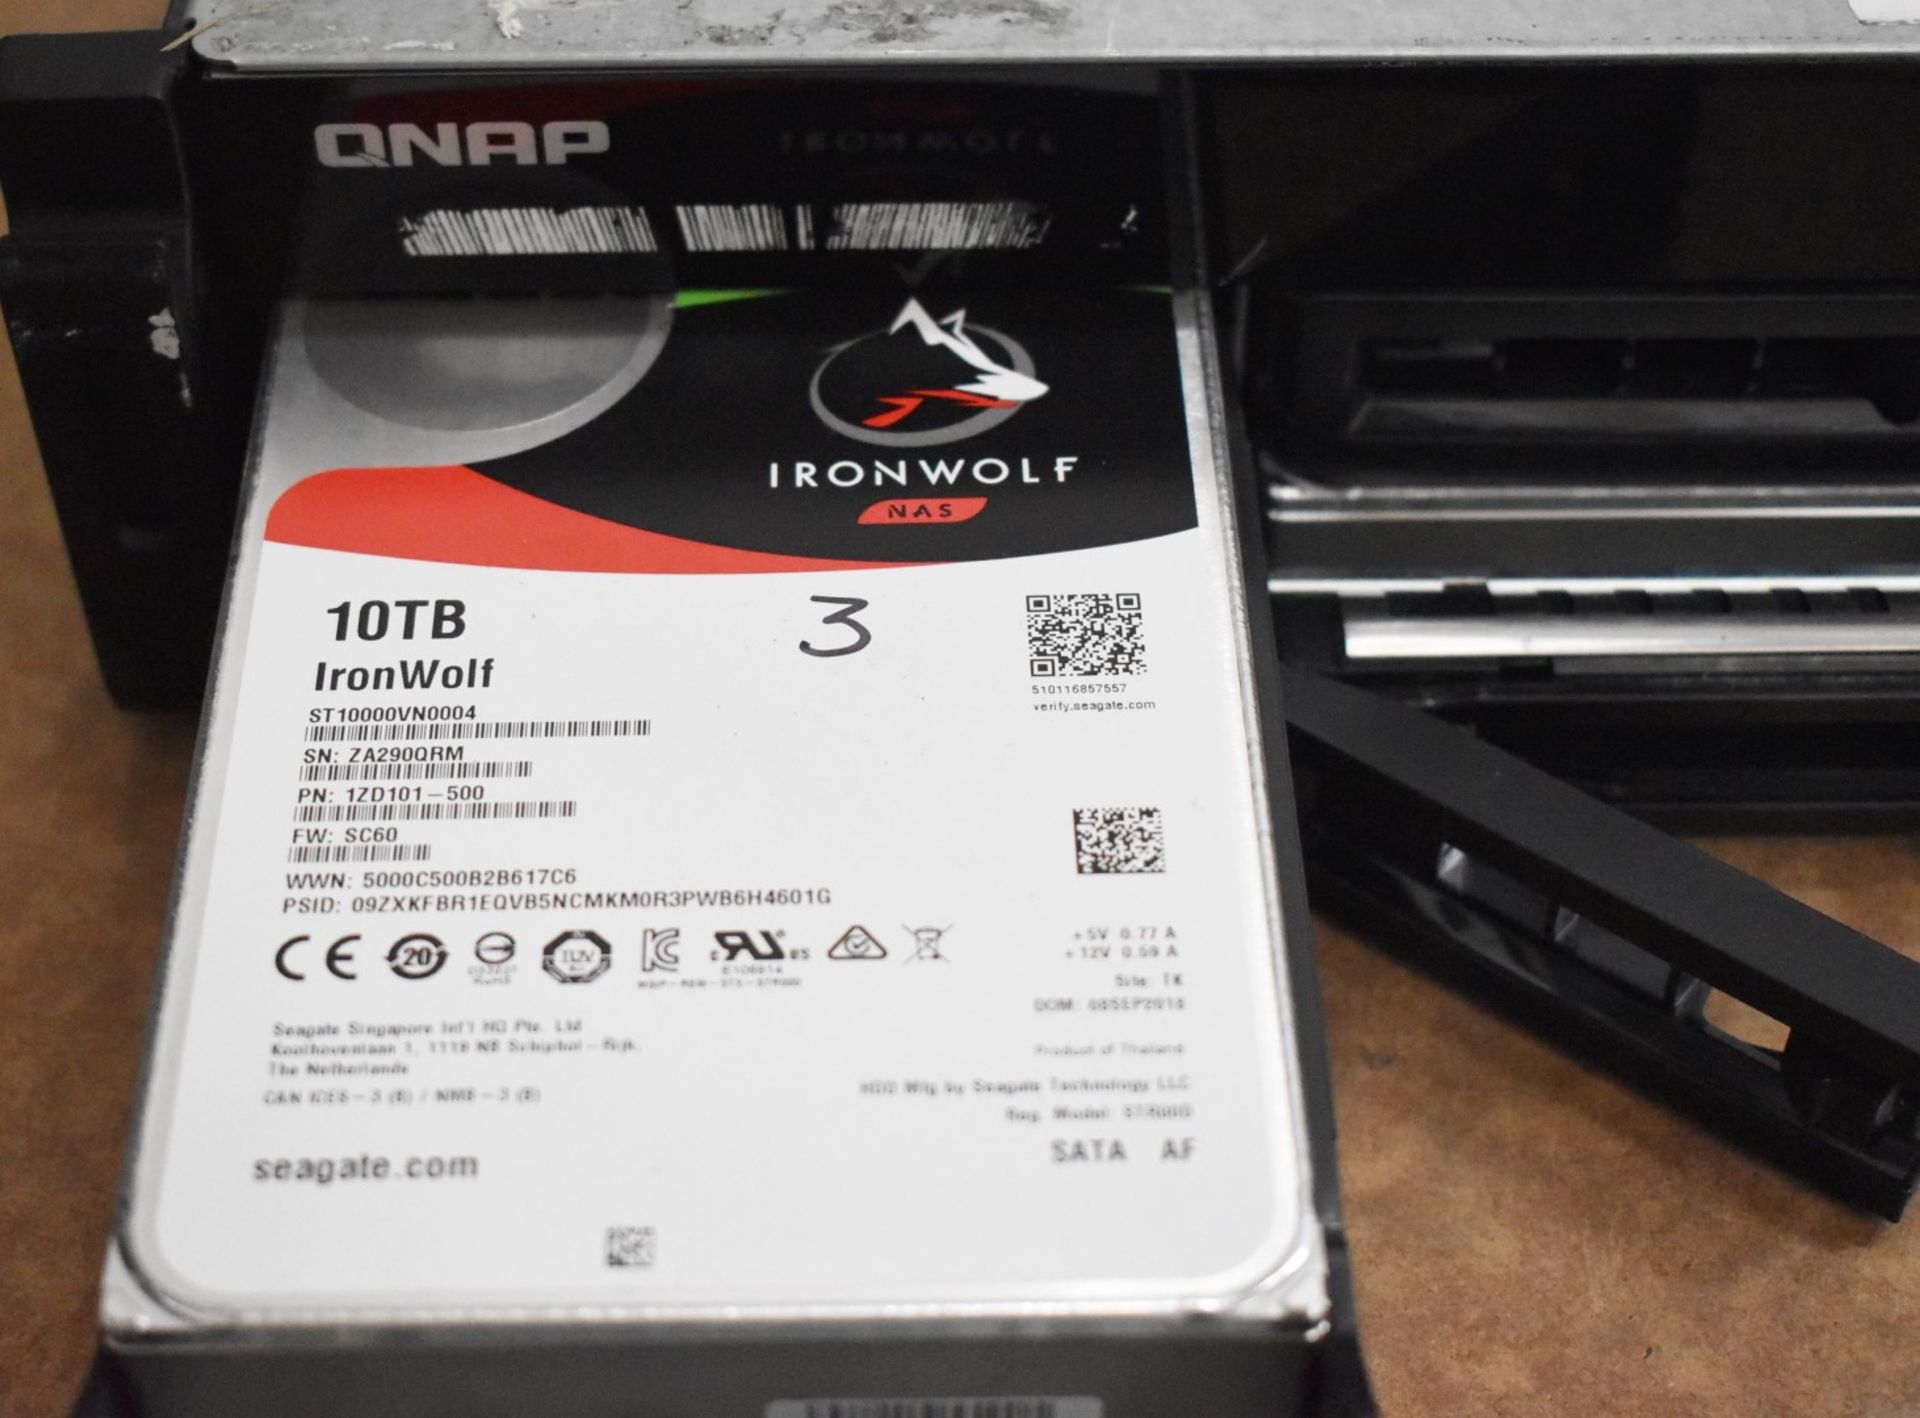 1 x QNAP Network Attached Storage Unit - Model TS-879U-RP - Includes 3 x Ironwolf 10tb Hard Drives - Image 7 of 11